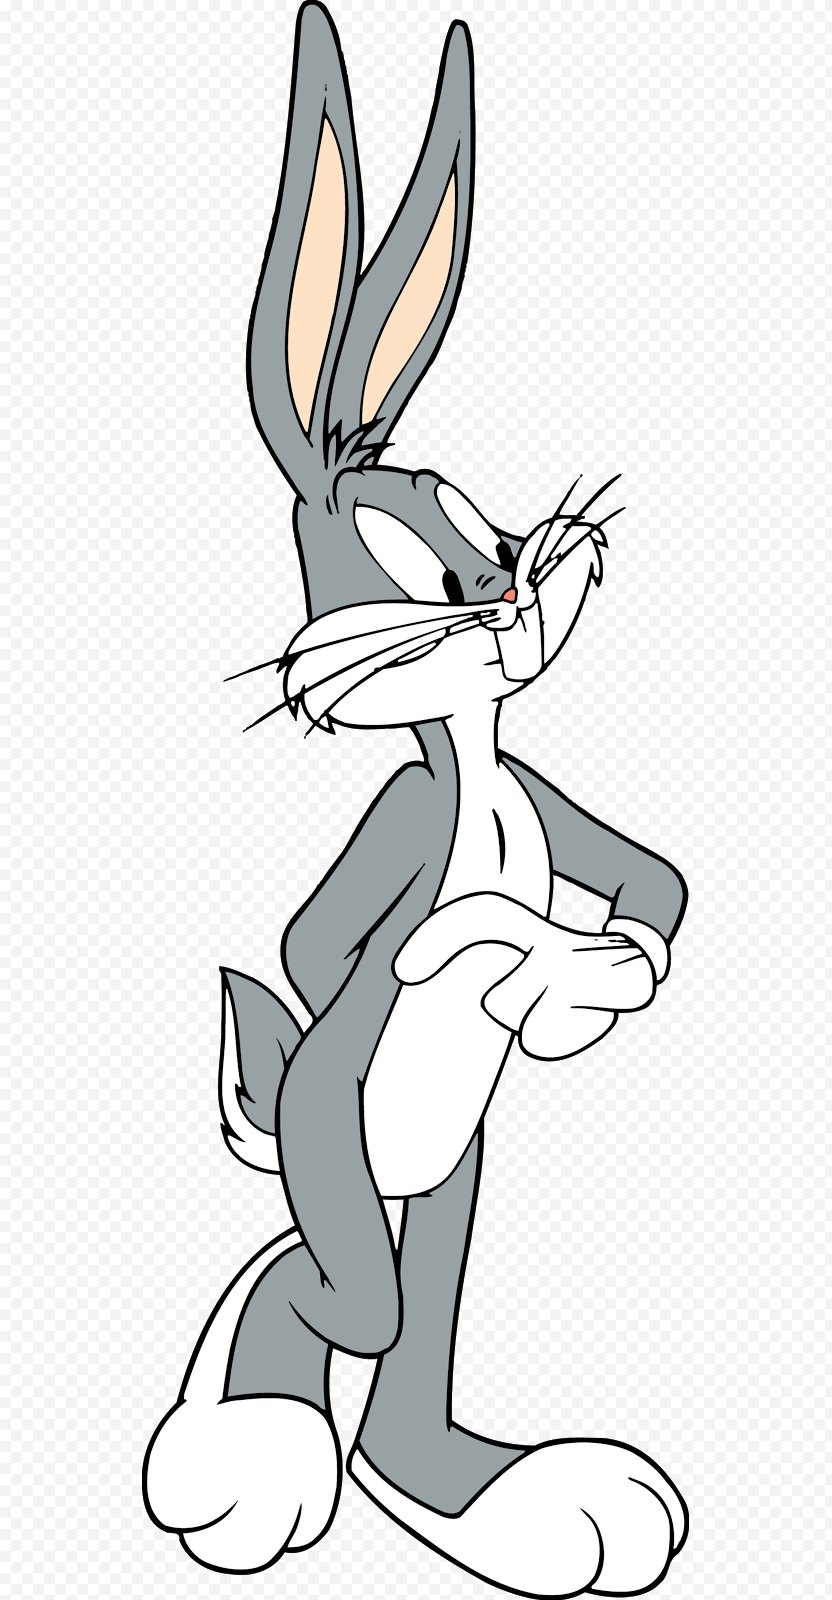 Bugs Bunny Cartoon Looney Tunes Clip Art - Joint PNG